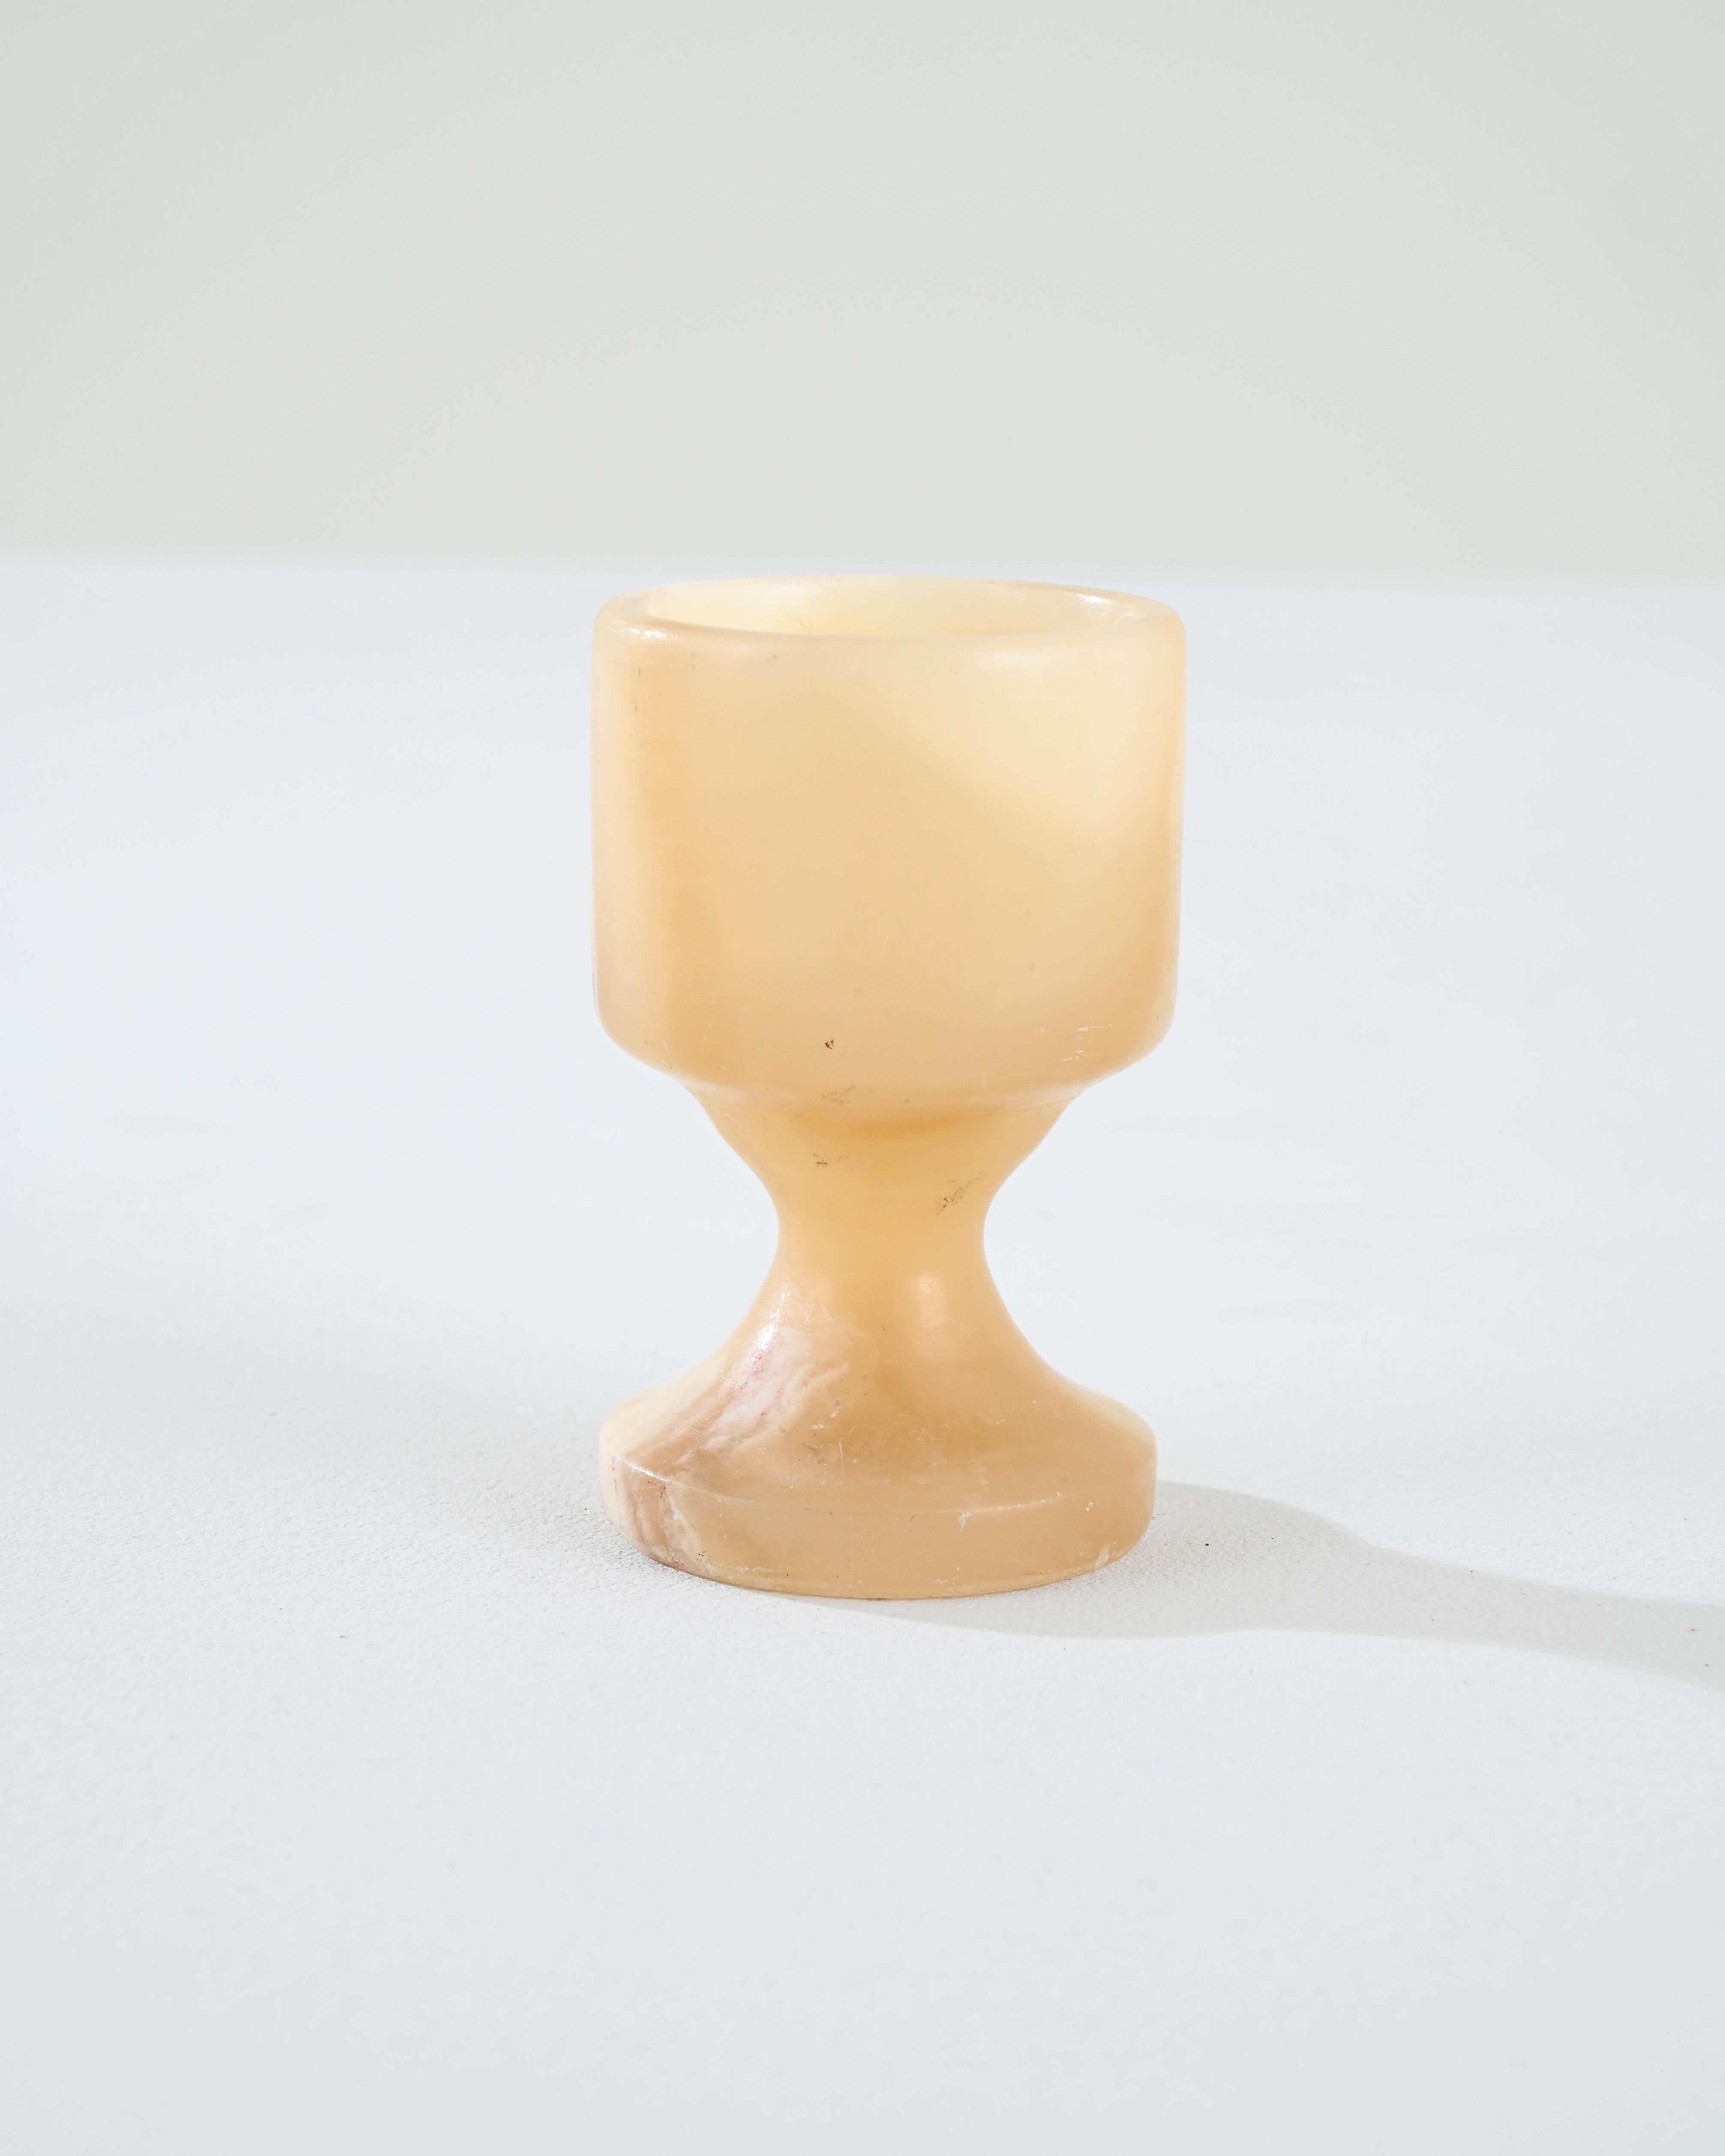 A marble chalice made in 19th century France. This petite drinking glass displays a bright and sunny disposition, crafted with simple yet refined artisanal expertise. Veins of darker details run diagonally across the sandy-beige marble, creating an